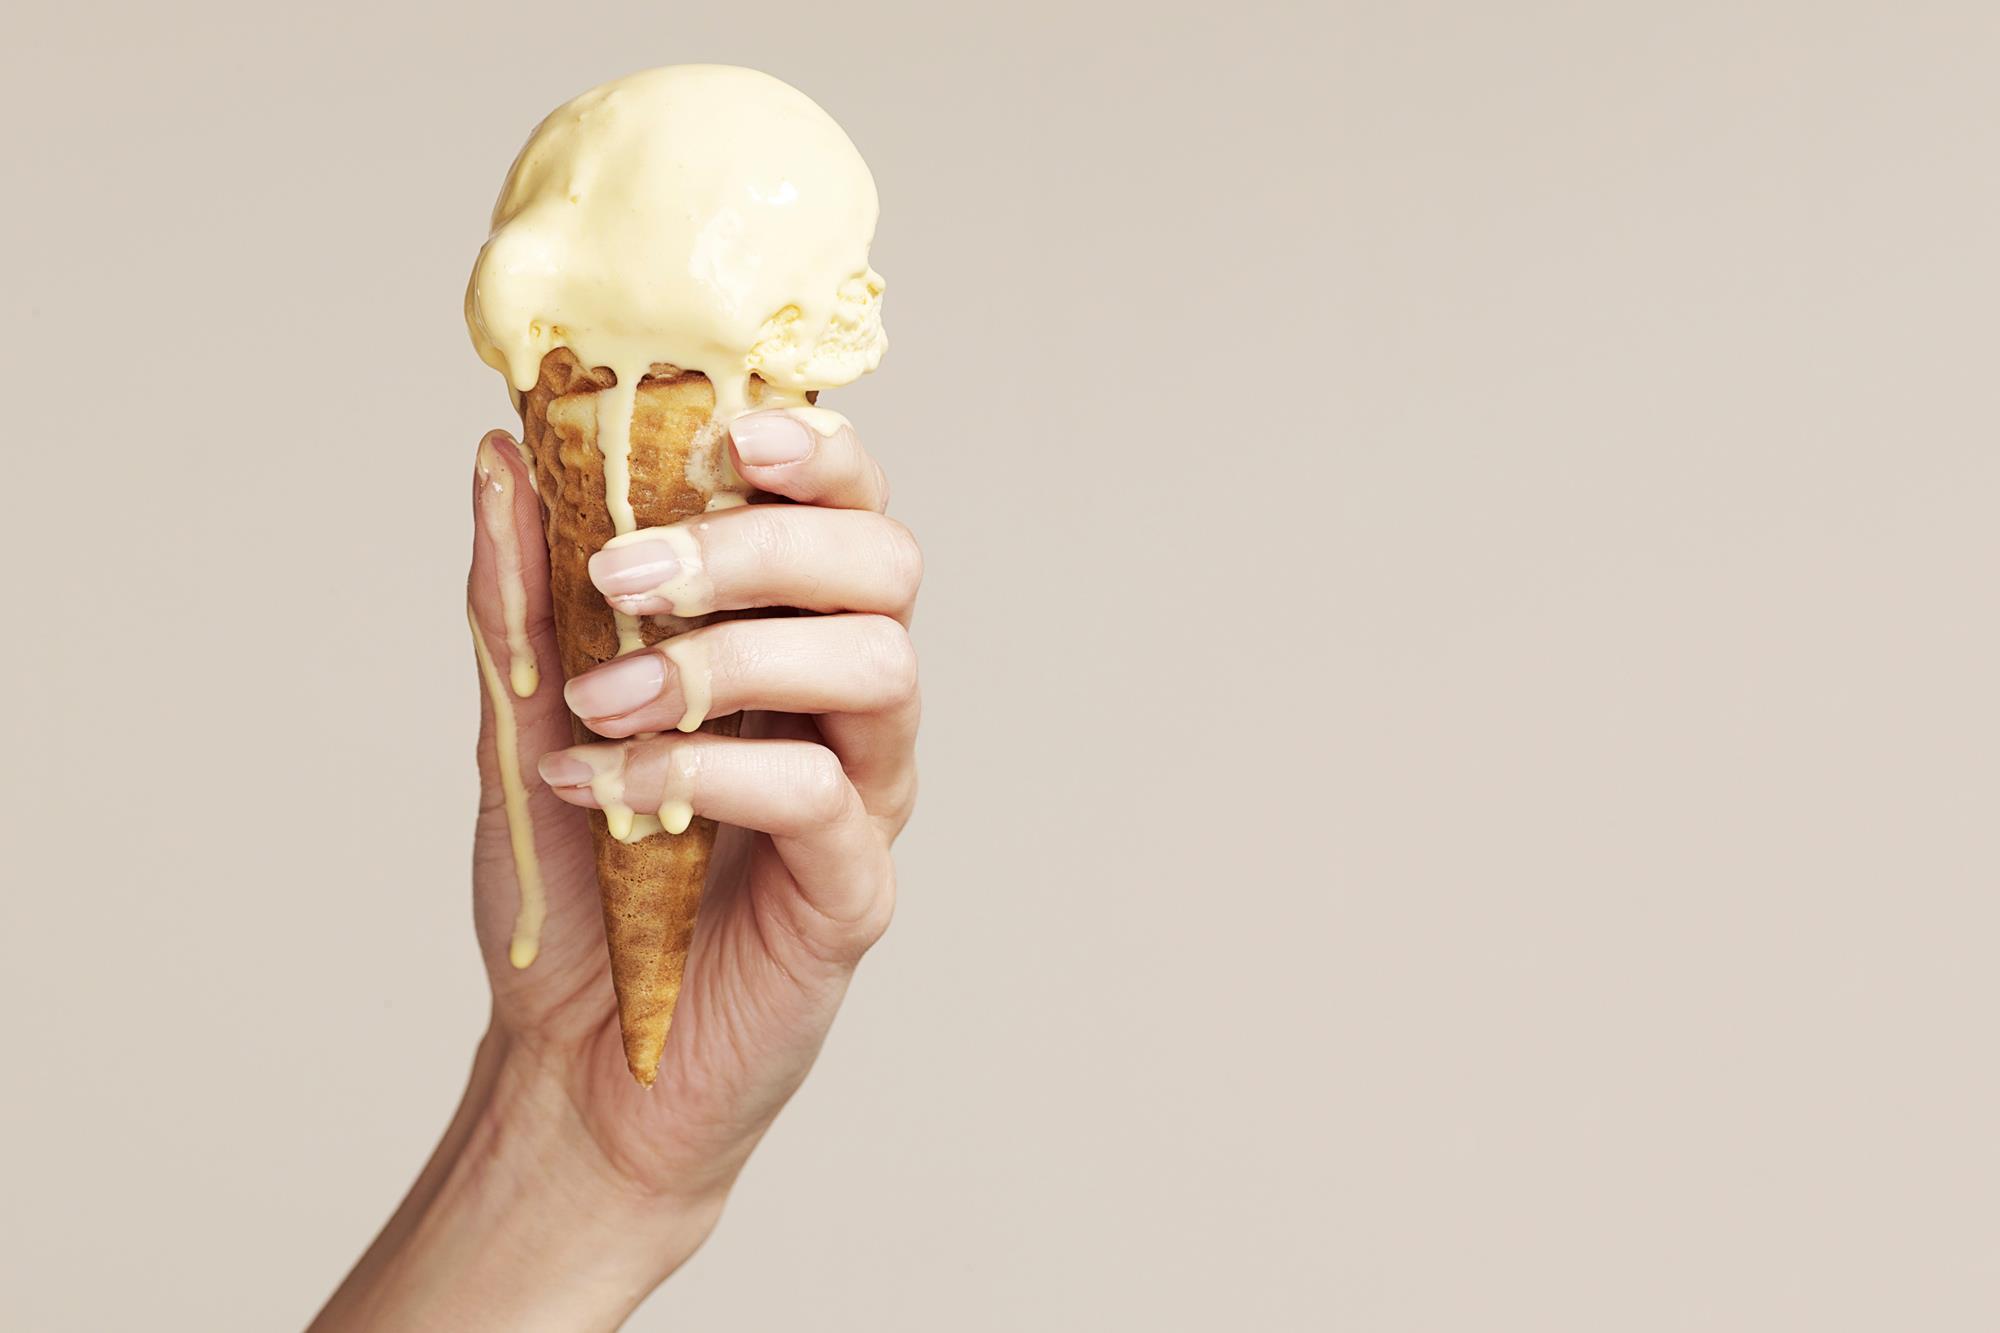 There's a new luxury ice cream brand on the scene